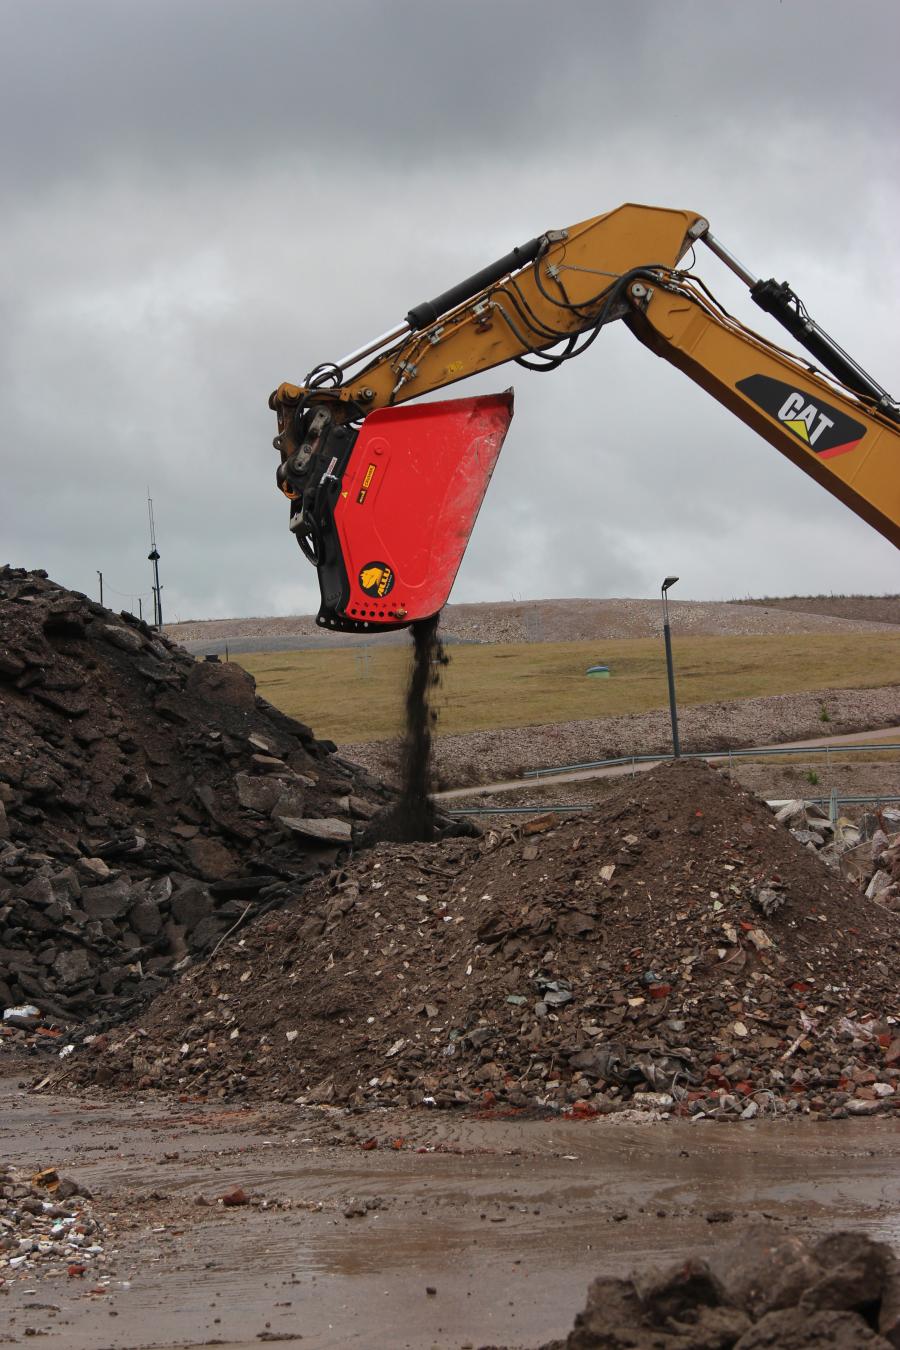 The very latest development from ALLU aimed at the demolition and recycling market is its new crusher series of –initially -three crusher models for excavators in the 10 to 33 ton range.